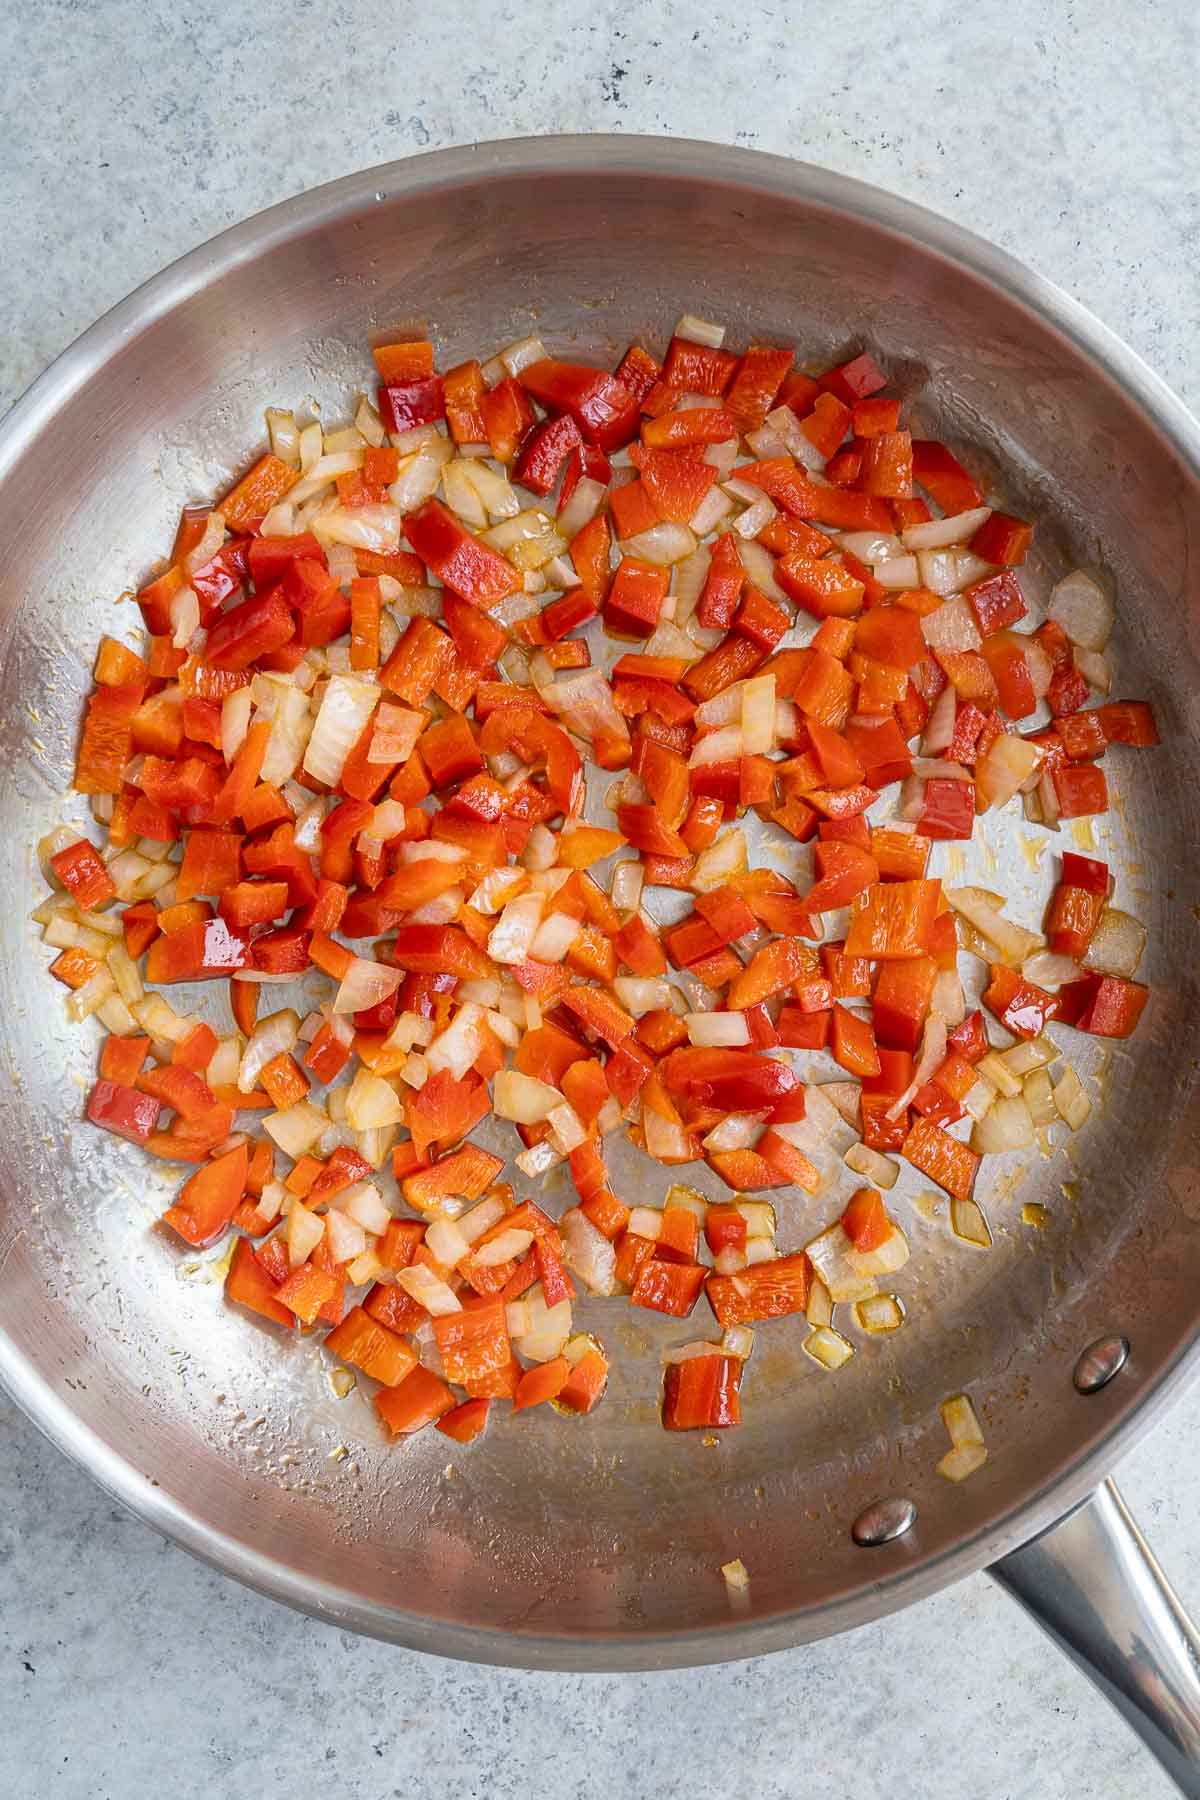 Stir frying onion and red pepper